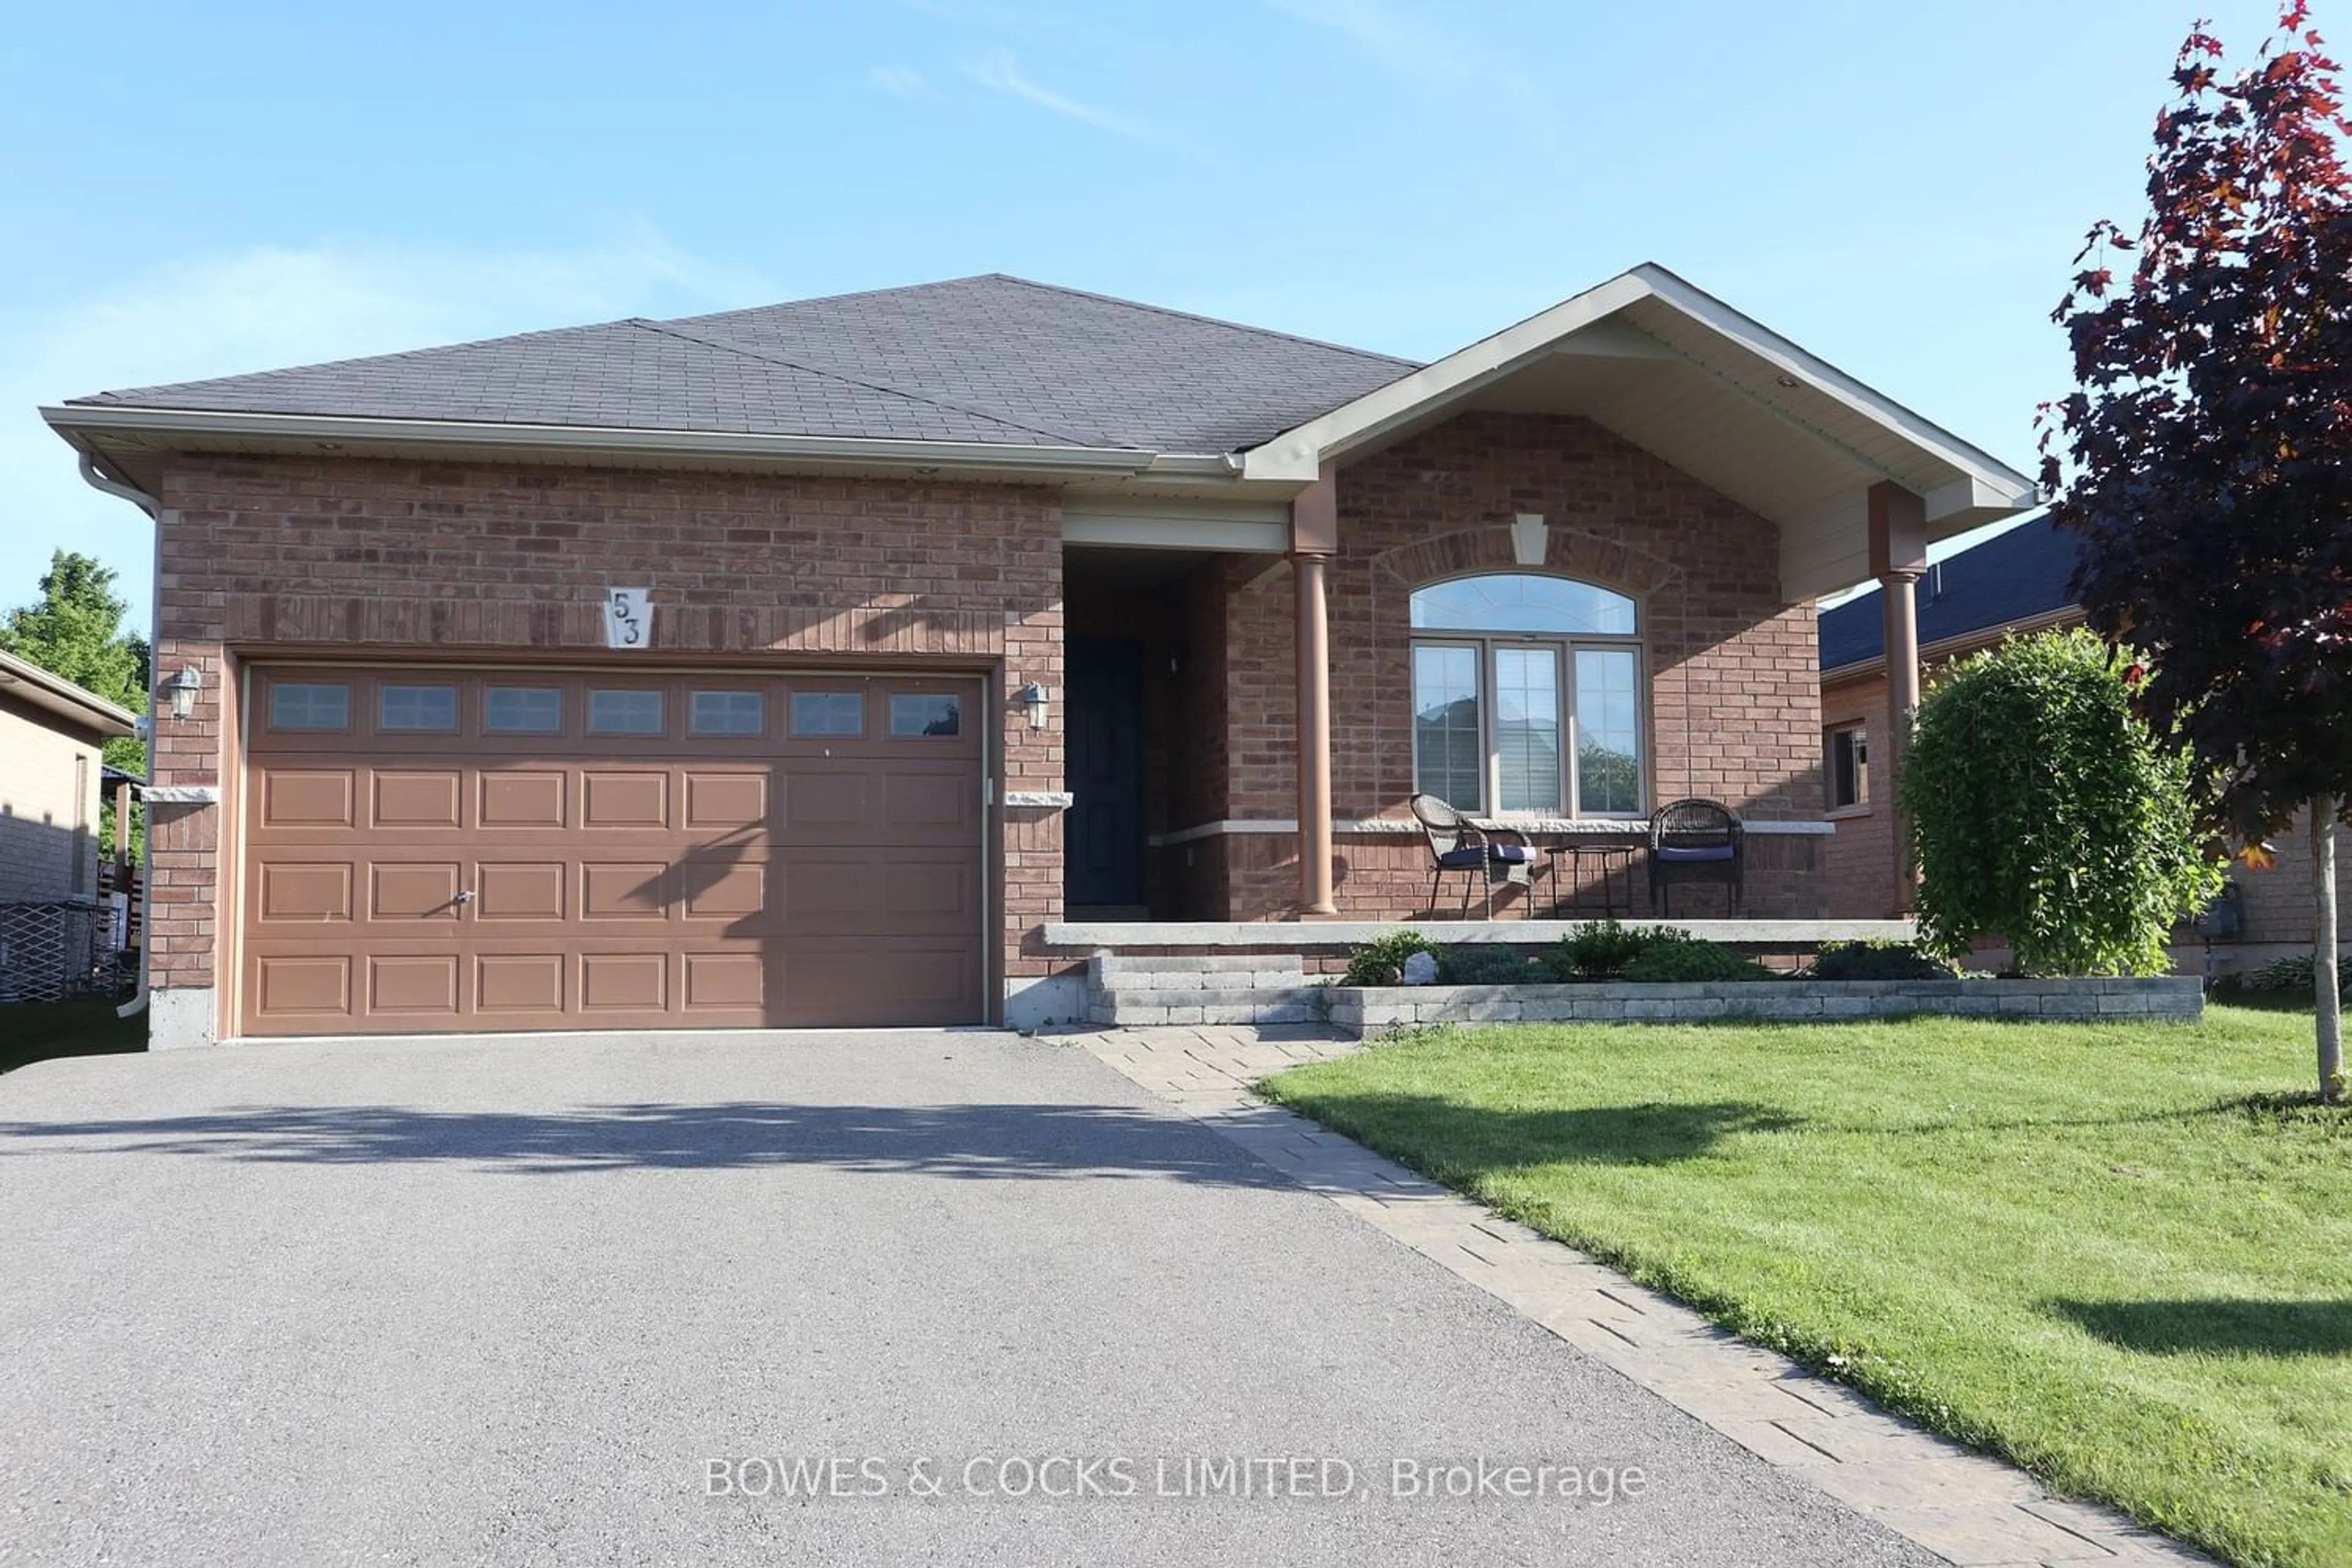 Home with brick exterior material for 53 Darnley St, Trent Hills Ontario K0L 1Y0